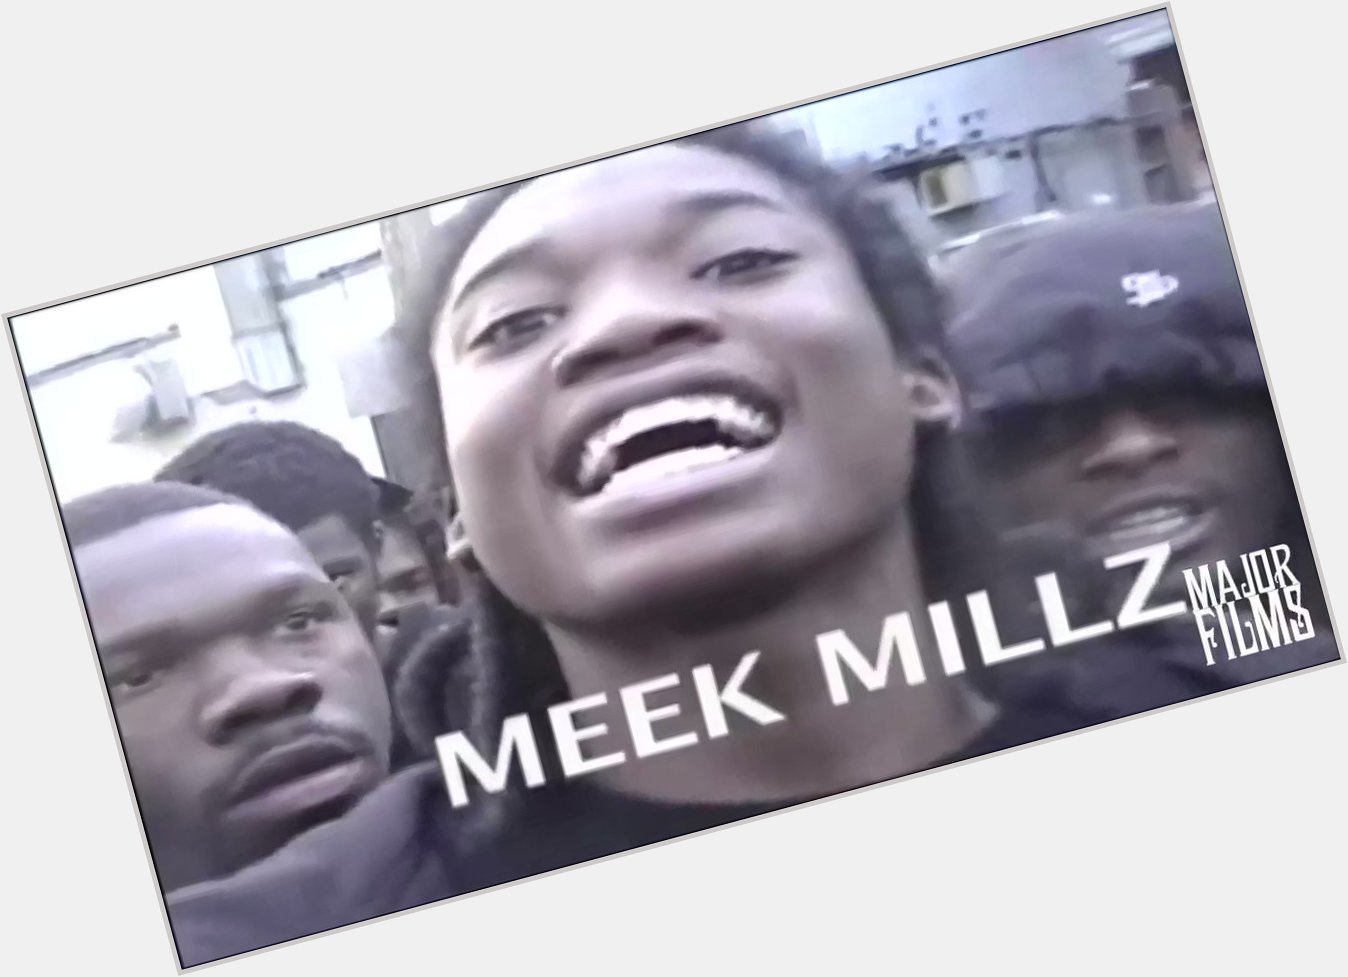 Happy 30th Birthday Meek Mill  You Came A Long Way    Live It Up   